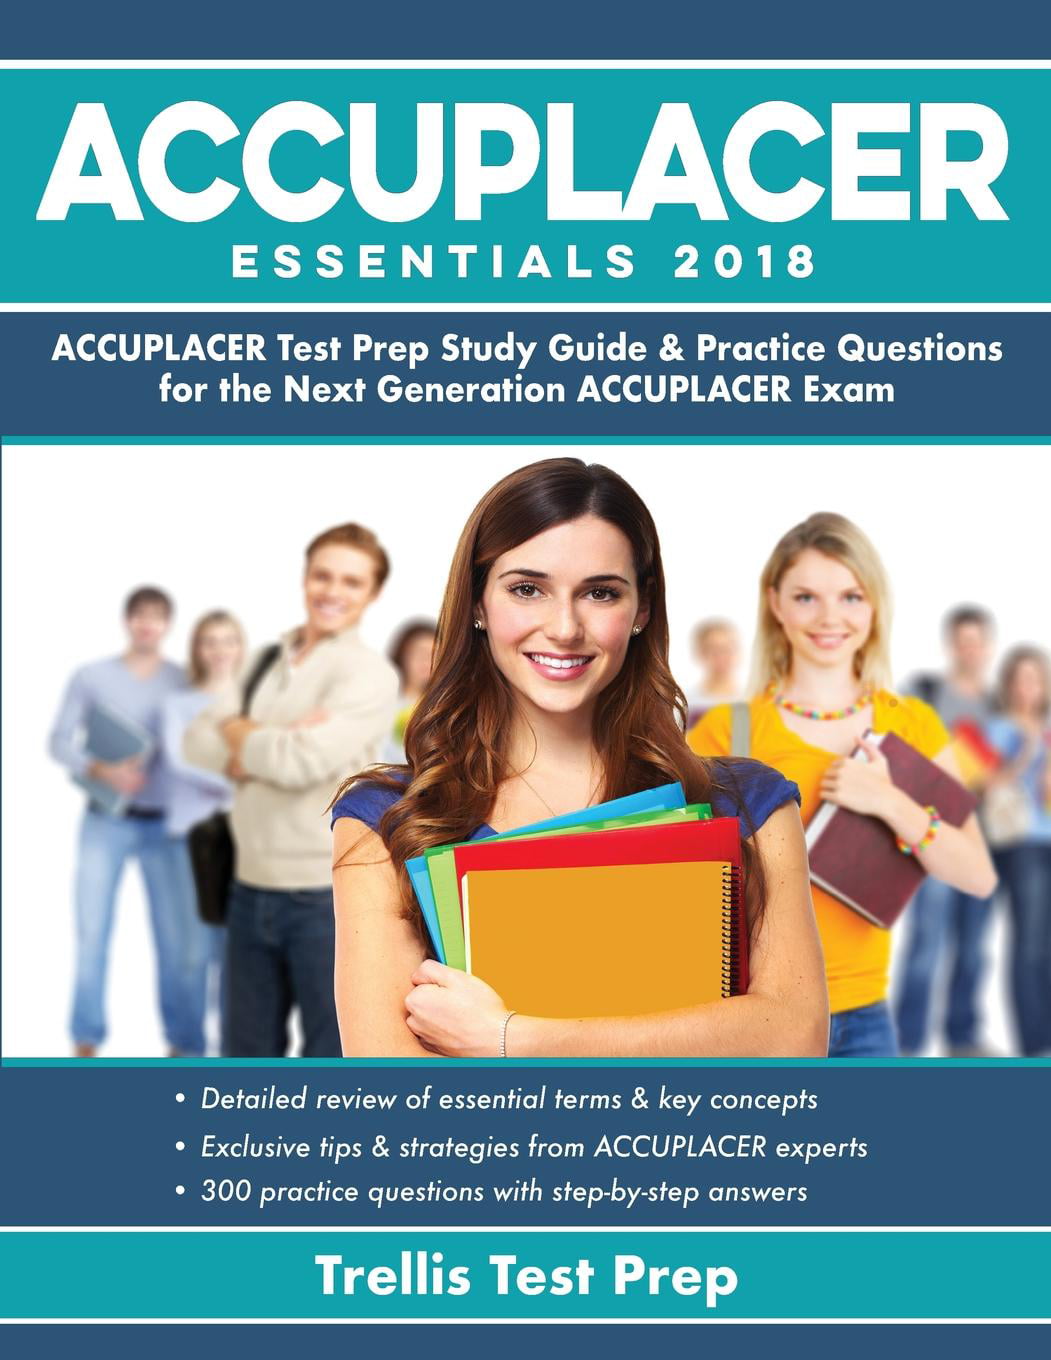 accuplacer-essentials-2018-accuplacer-test-prep-study-guide-practice